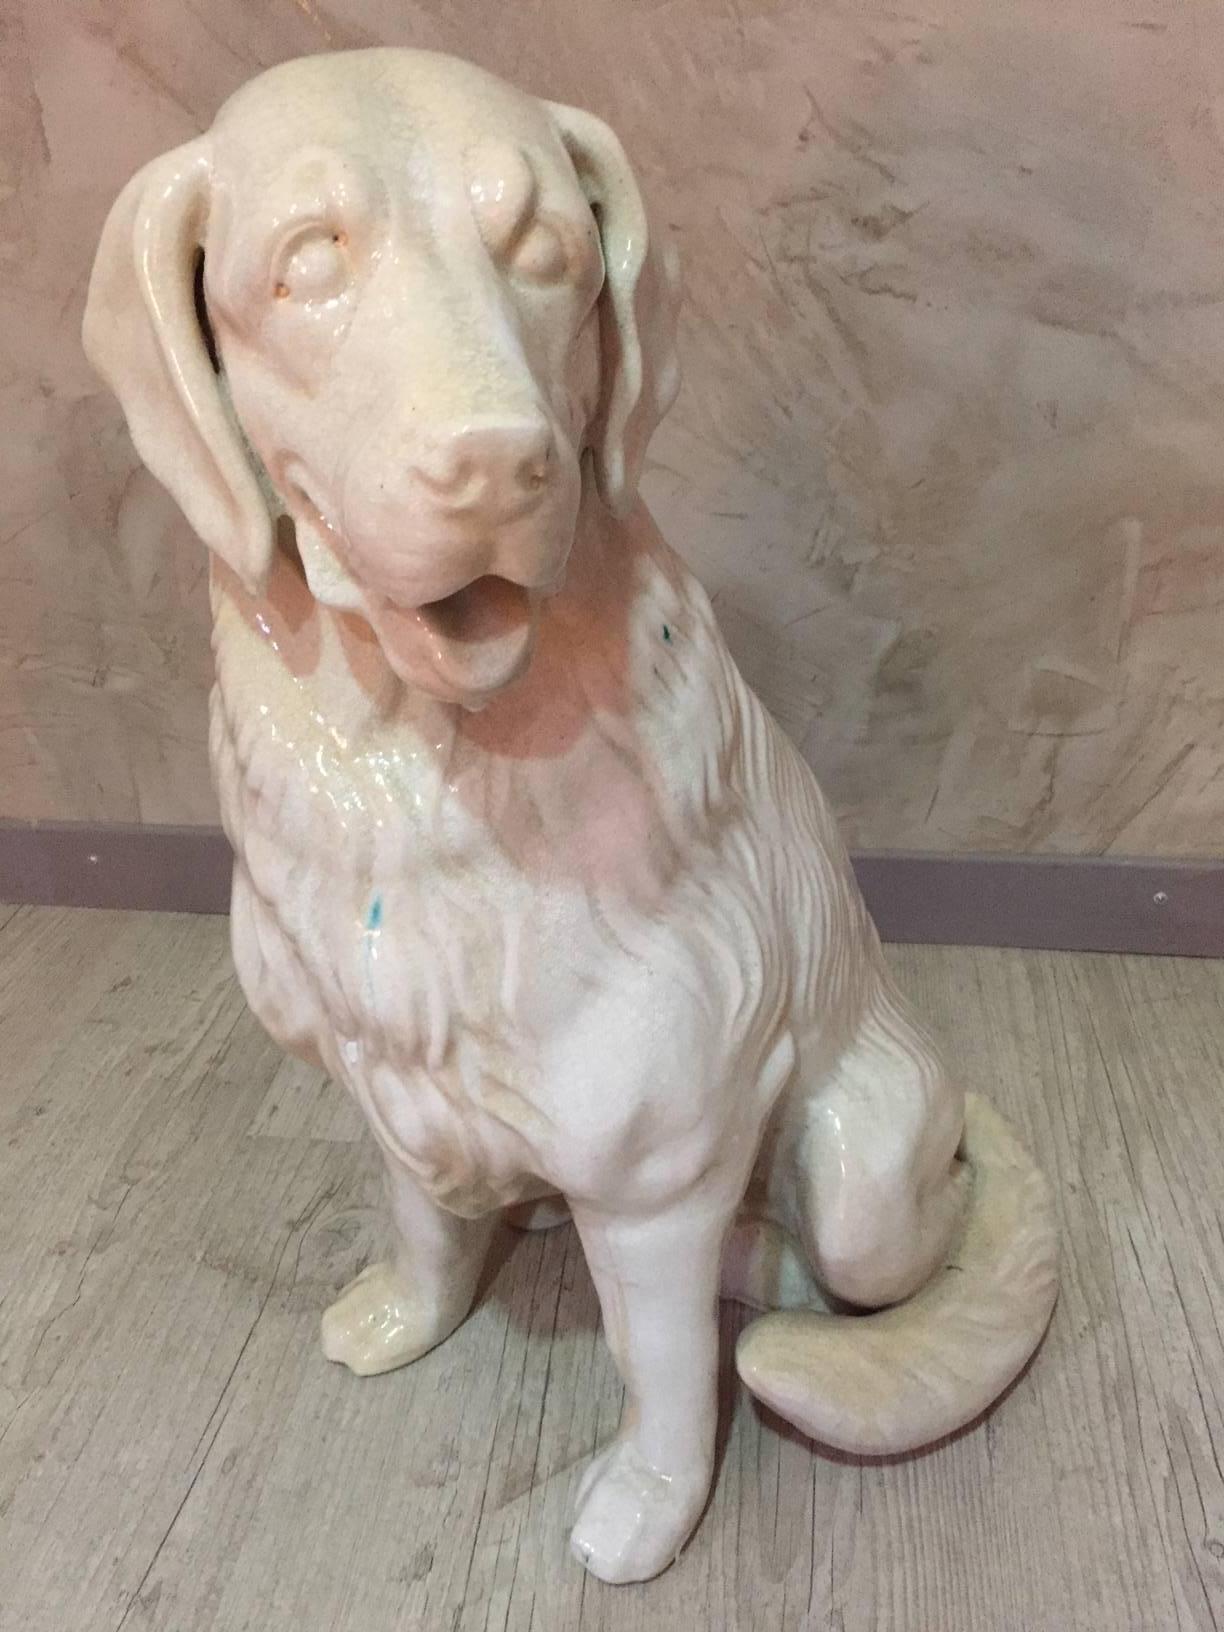 Midcentury French ceramic dog from Vallauris.
Vallauris is a small town in the south of France where the ceramic atelier and manufactures are well represented for their good quality.
The dog is a type of Golden retriever.
The are some green marks